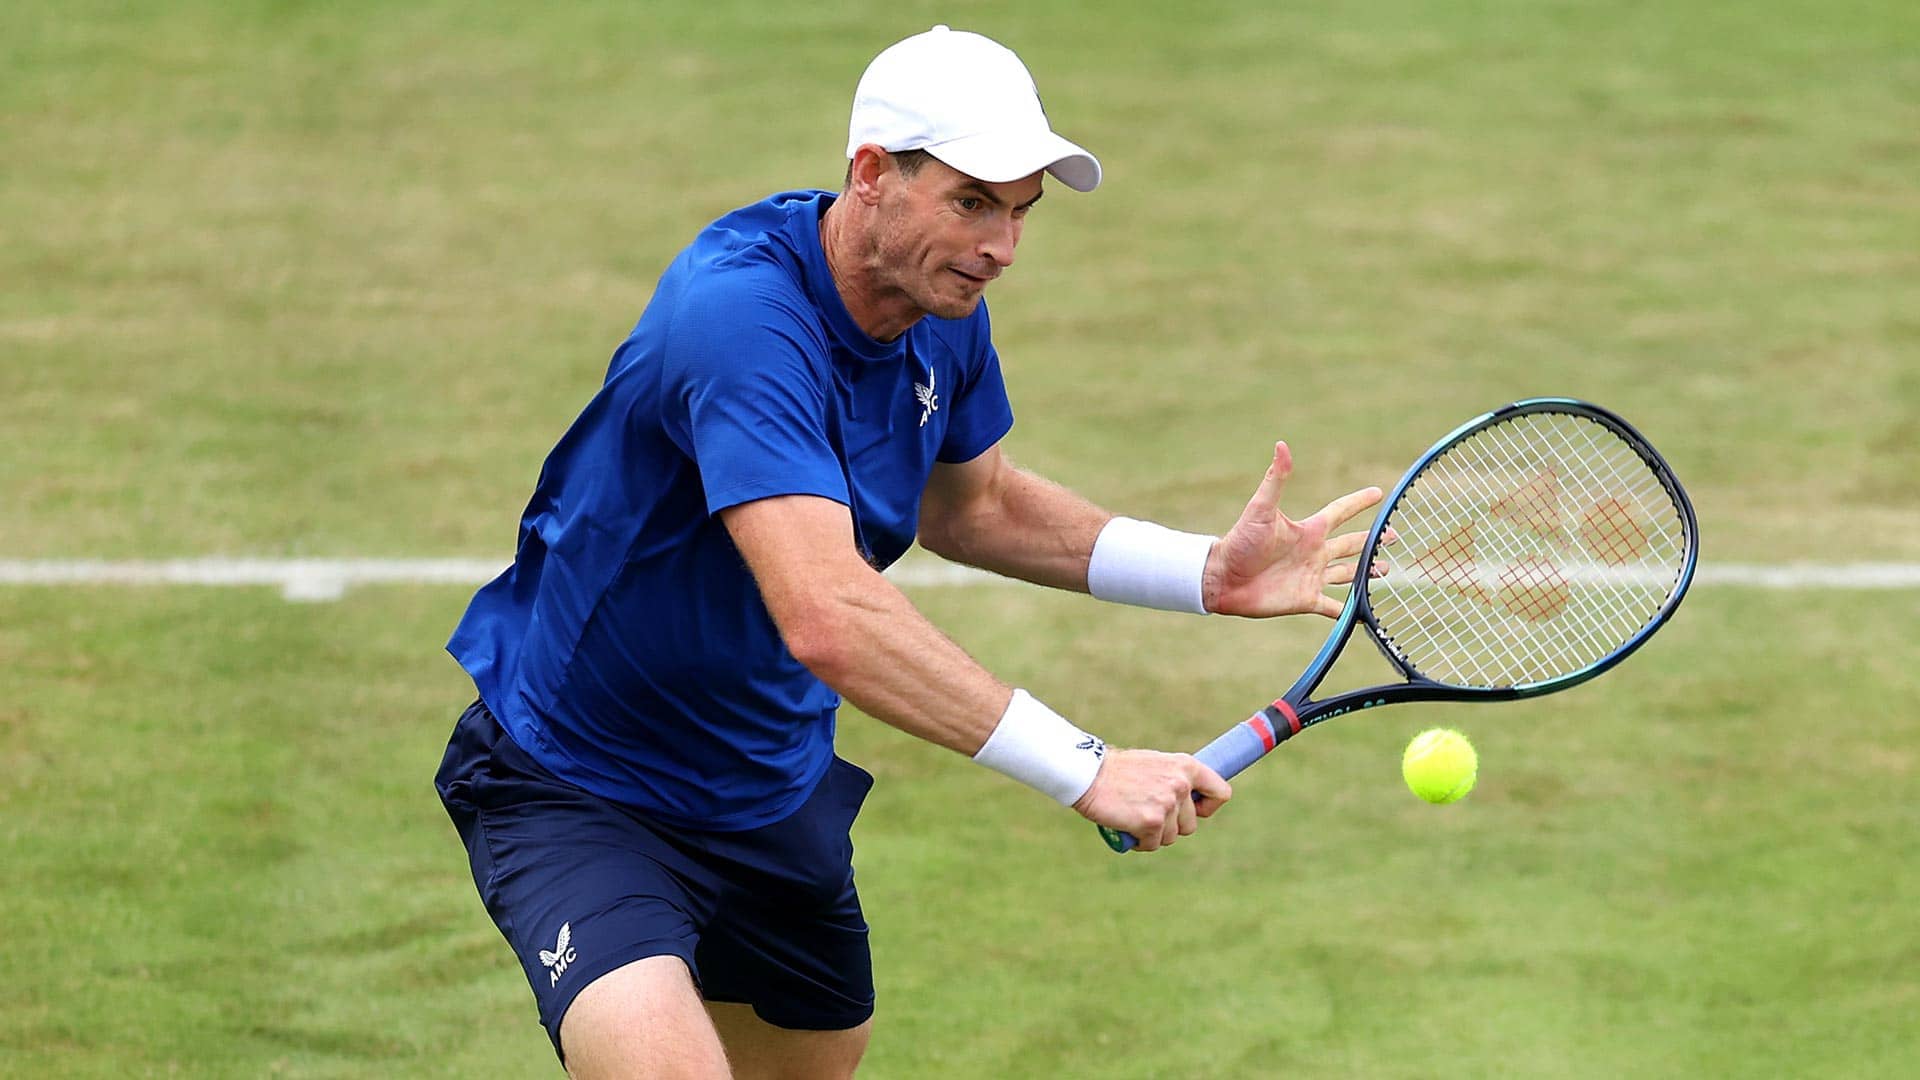 Andy Murray triumphed at Wimbledon in 2013 and 2016.